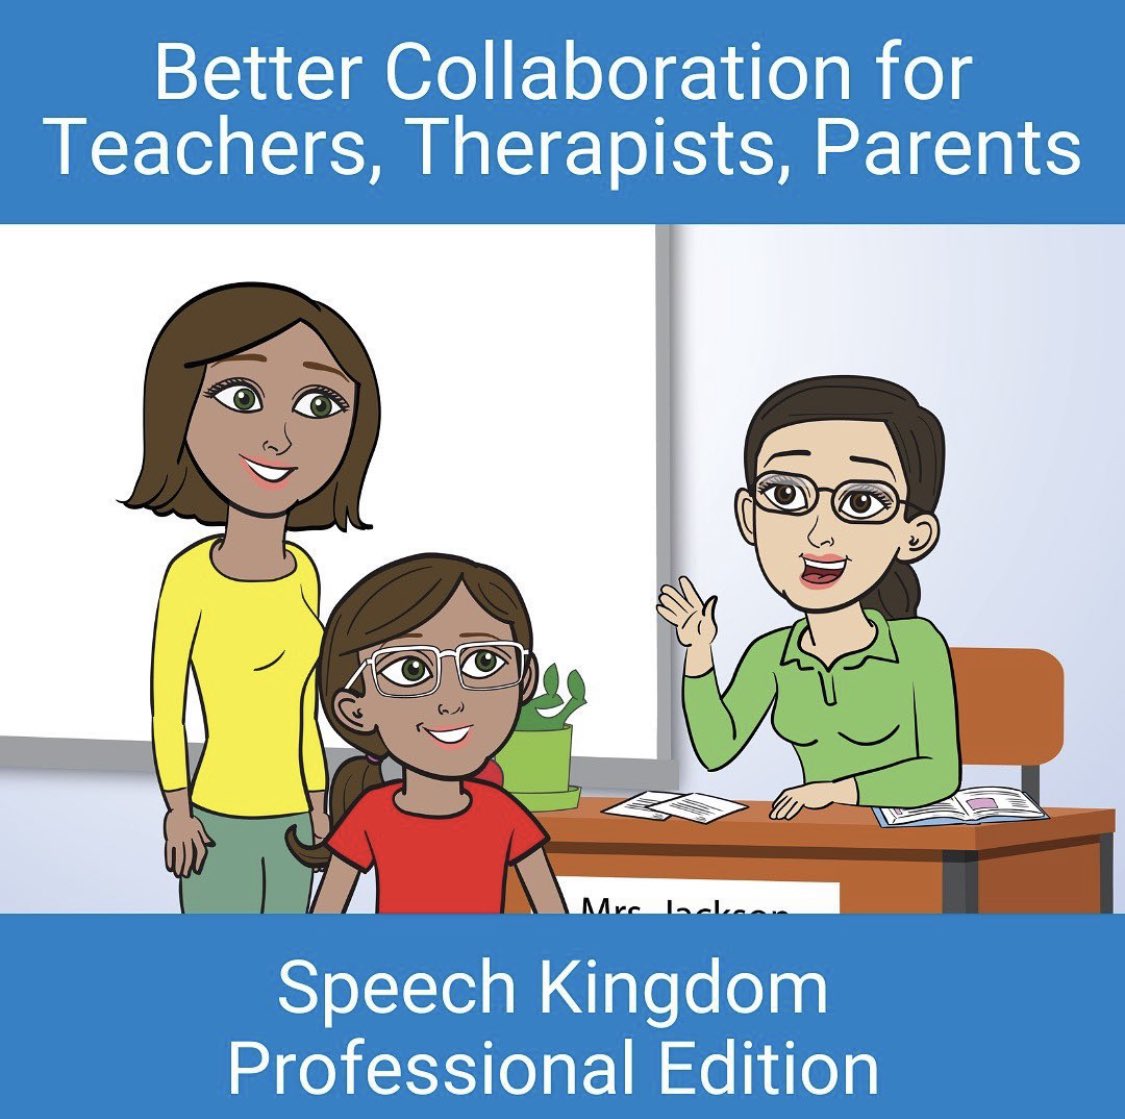 Our program is designed for collaboration of all professionals and parents with Secure Student Sharing. Access can be shared with parents at no additional cost. 

#speechkingdom #ASD #ADHD #specialed #autism #SLP #learningappsforautism #specialeducation #spedteachers #socialskill